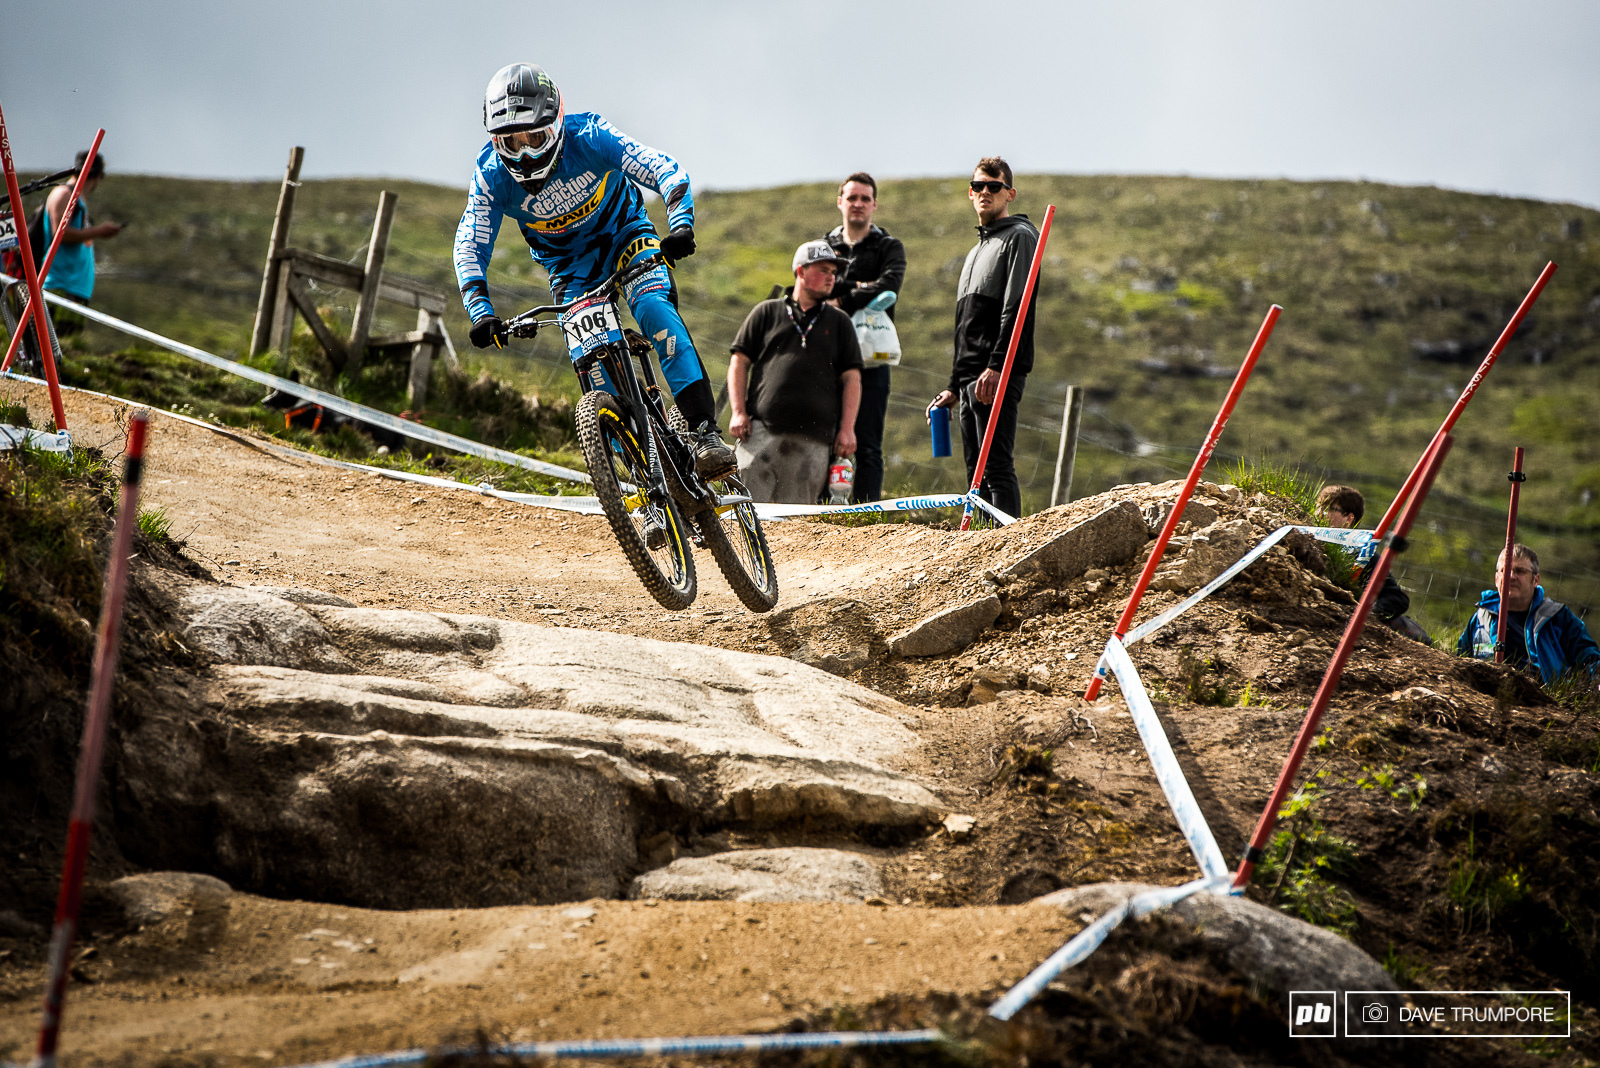 Currently sitting in second in the Enduro World Series, Sam Hill rode his DH bike for the first time in many months to grab one of the final spots in qualifying.